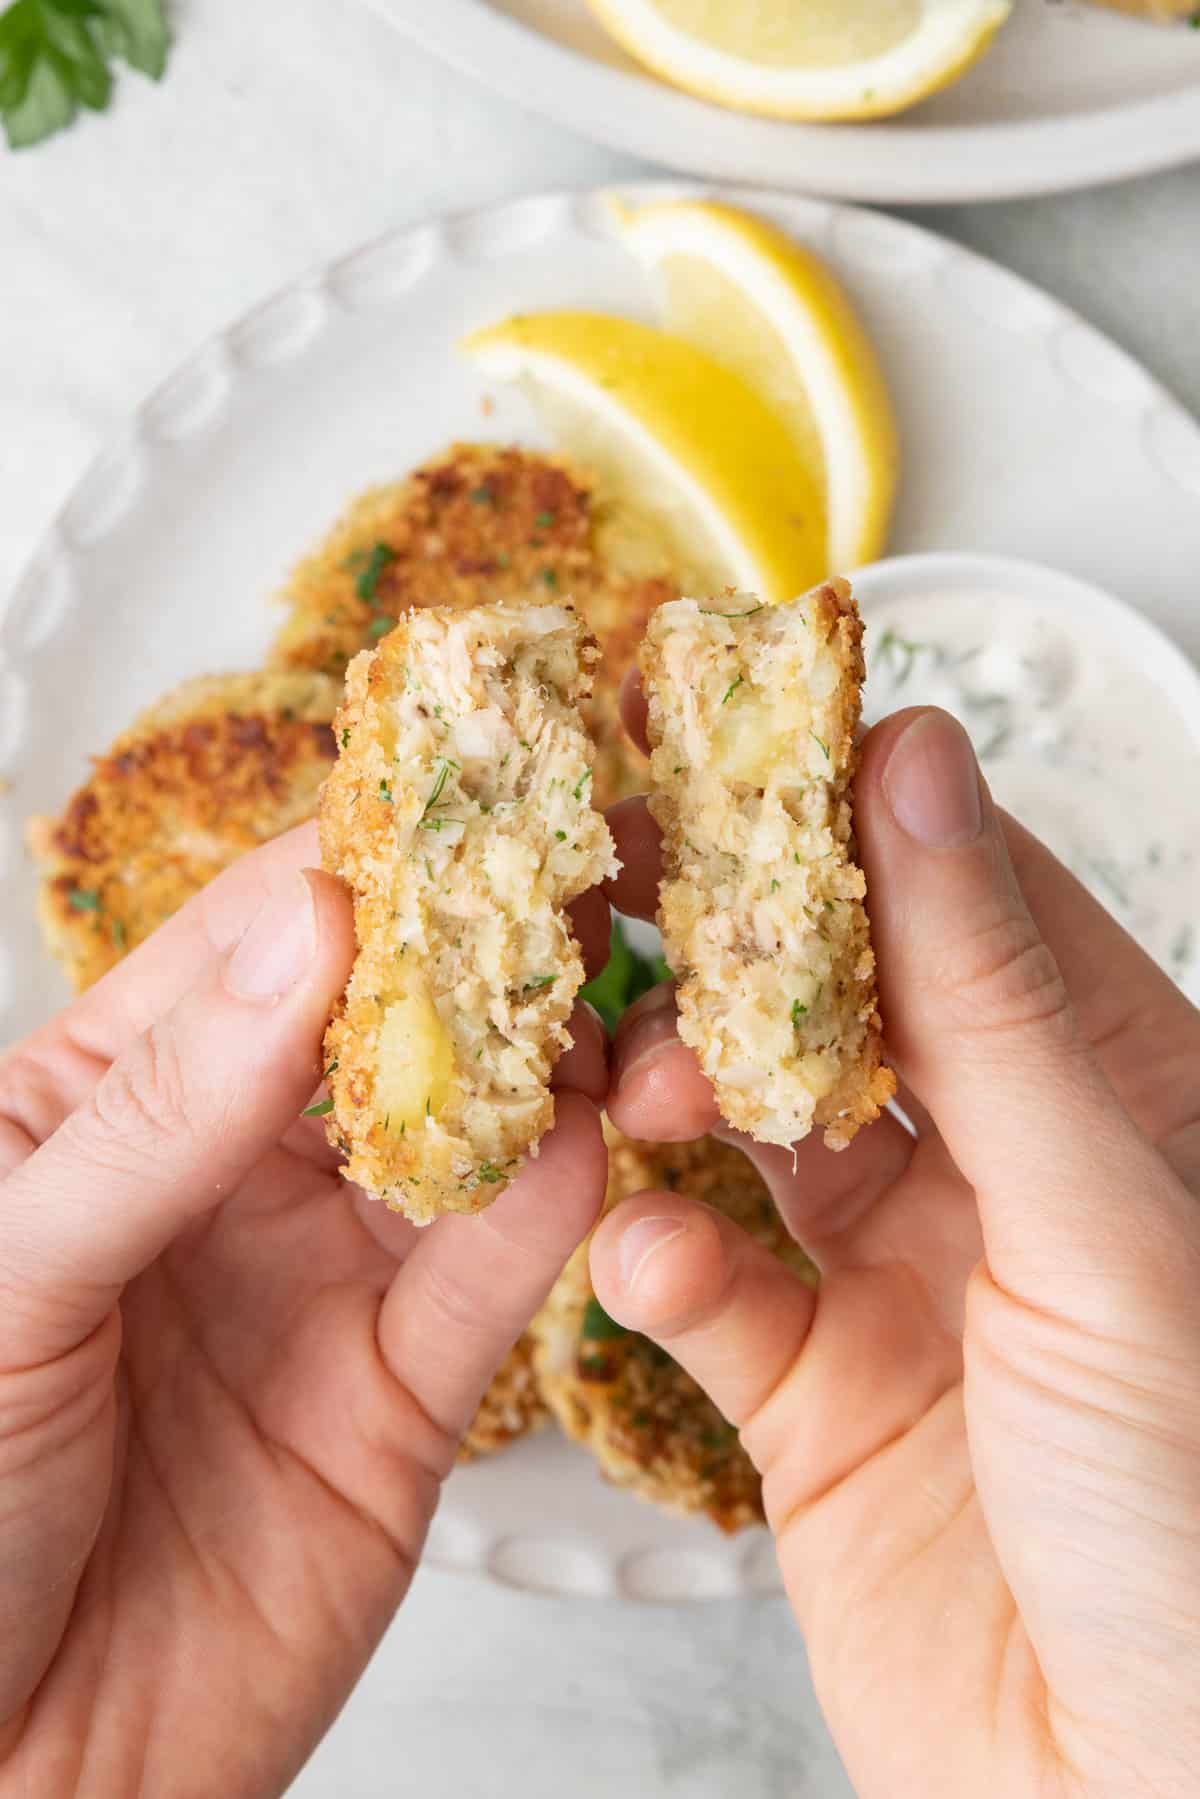 Hand holding two halves of a potato tuna cake to show inside texture.